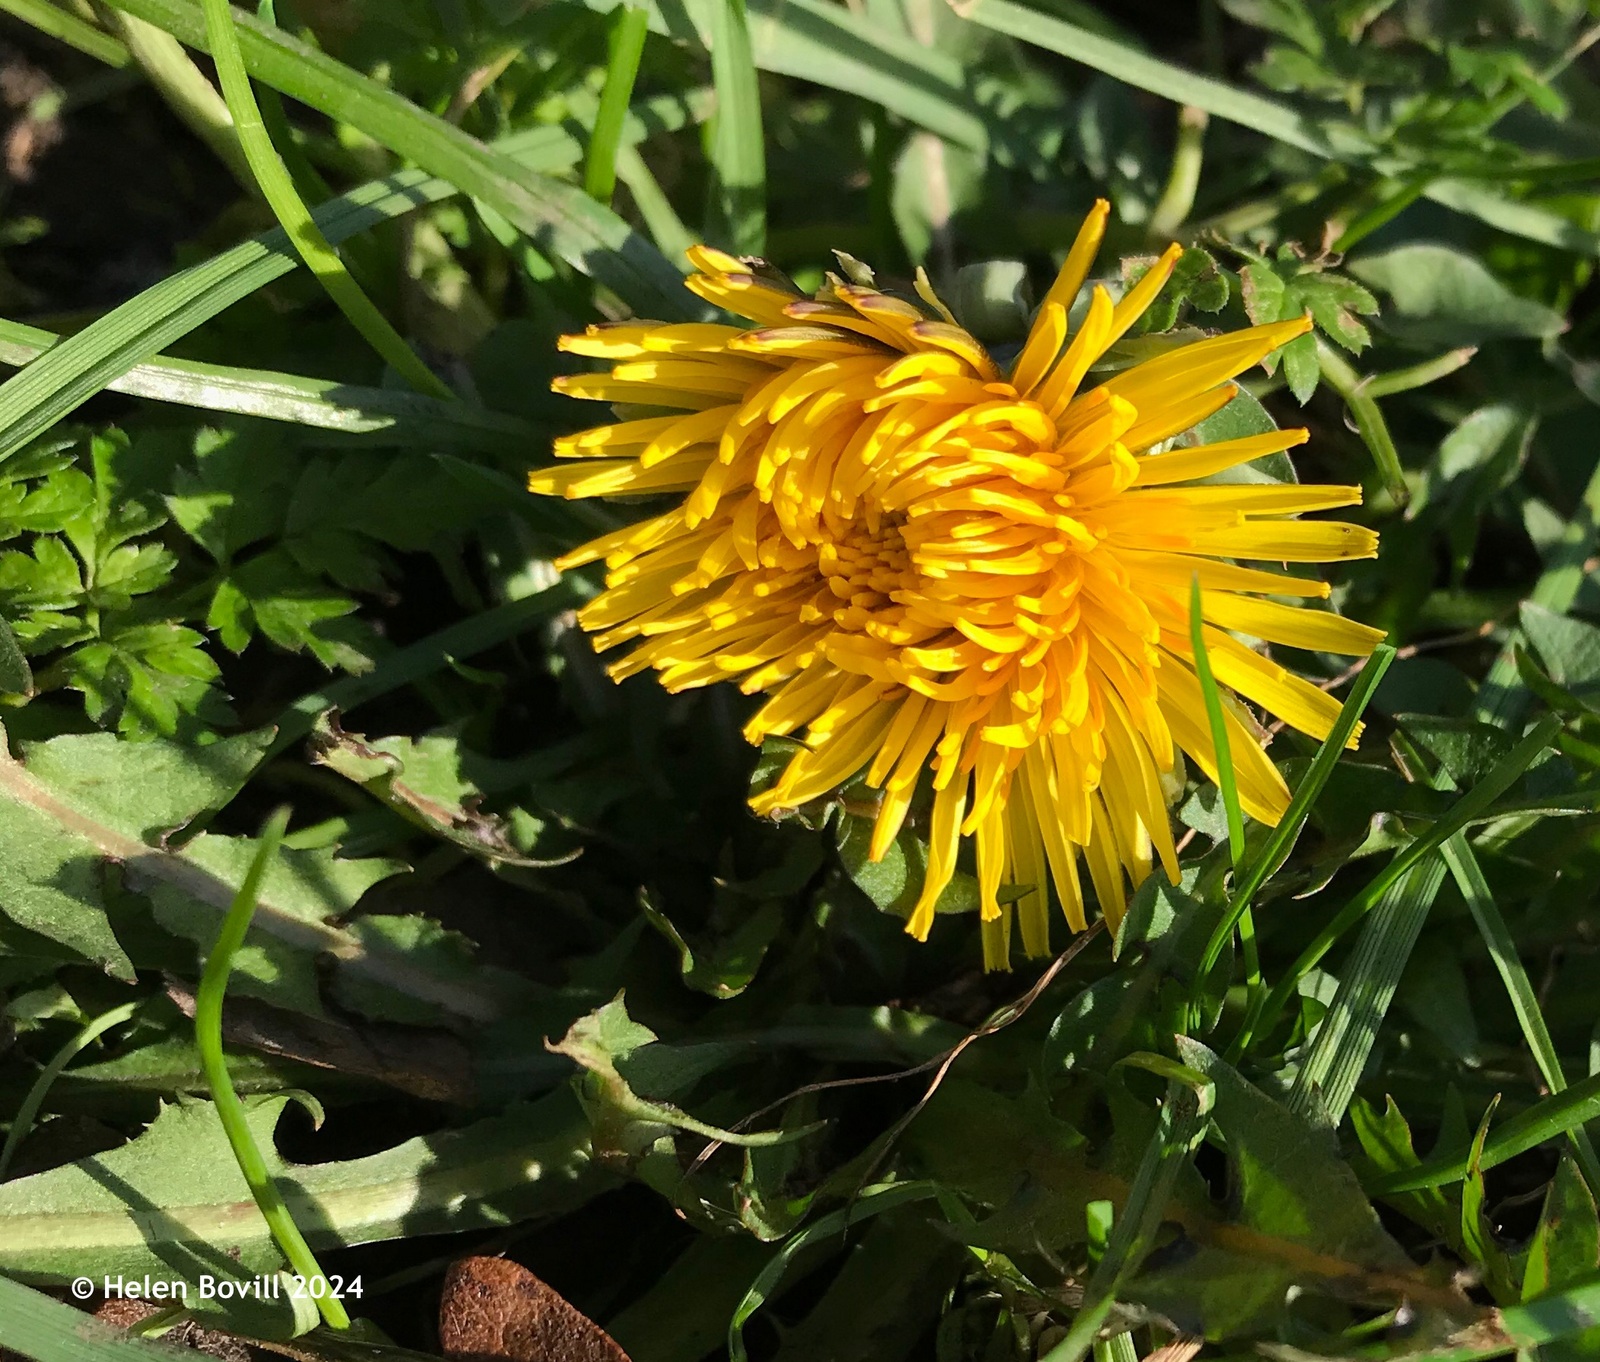 A dandelion growing low amongst the grass 